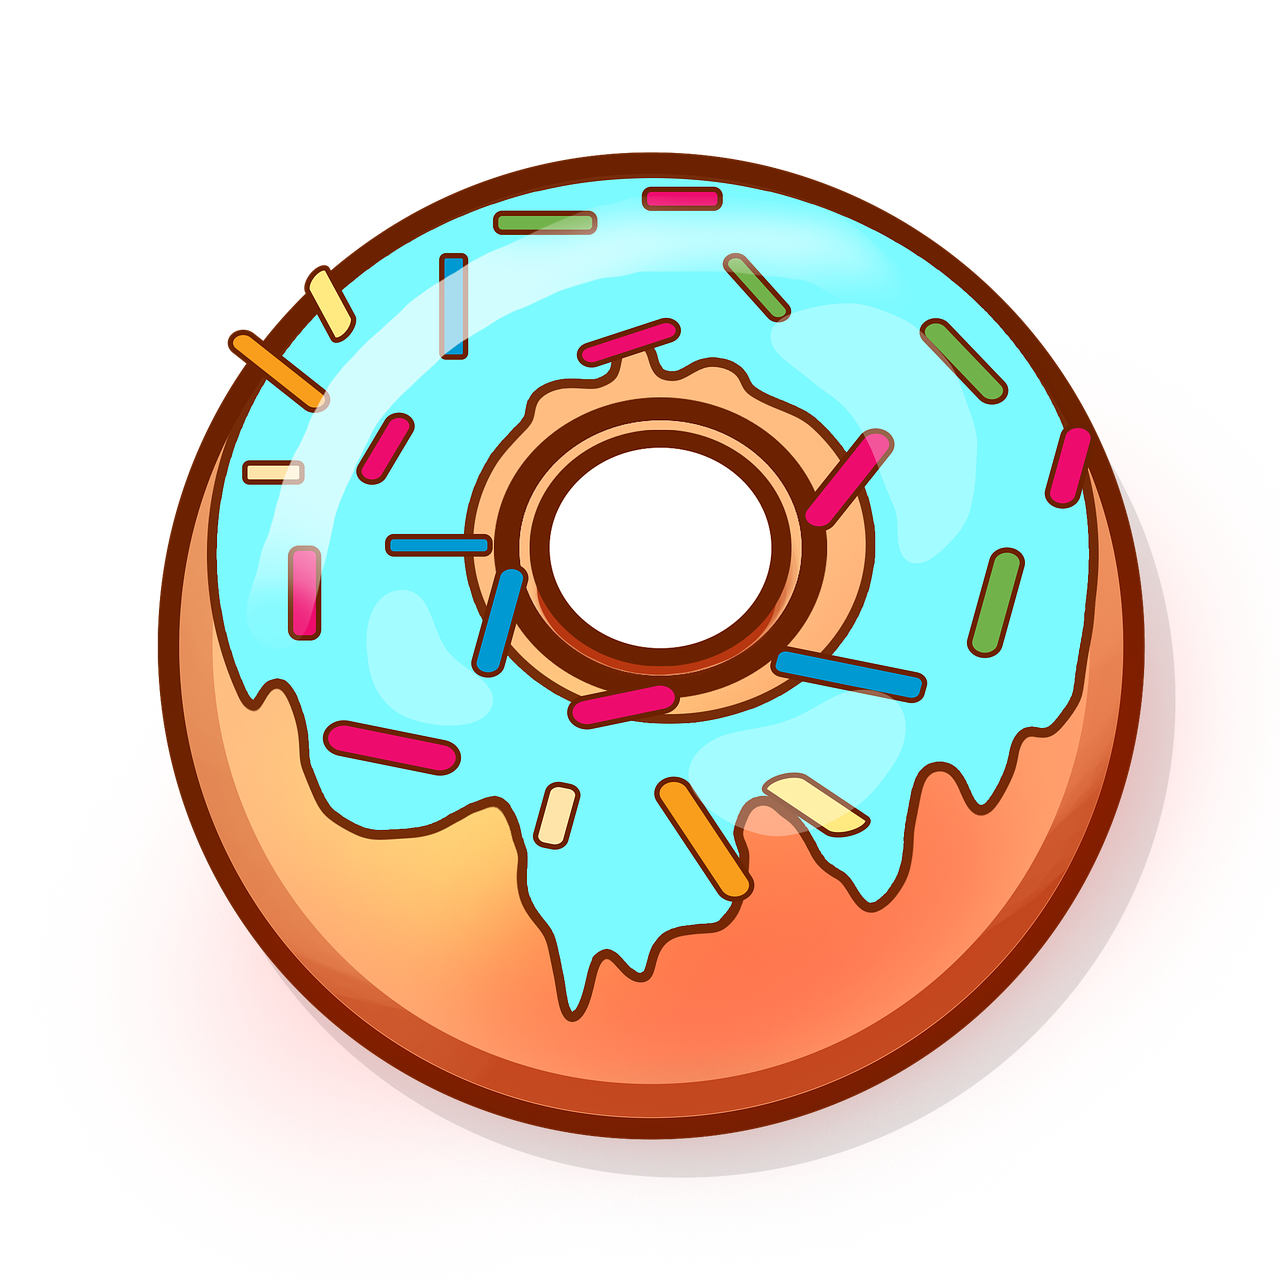 a blue frosted donut with sprinkles on it, an illustration of, pop art, in the spotlight, high contrast illustration, horrific, full color illustration